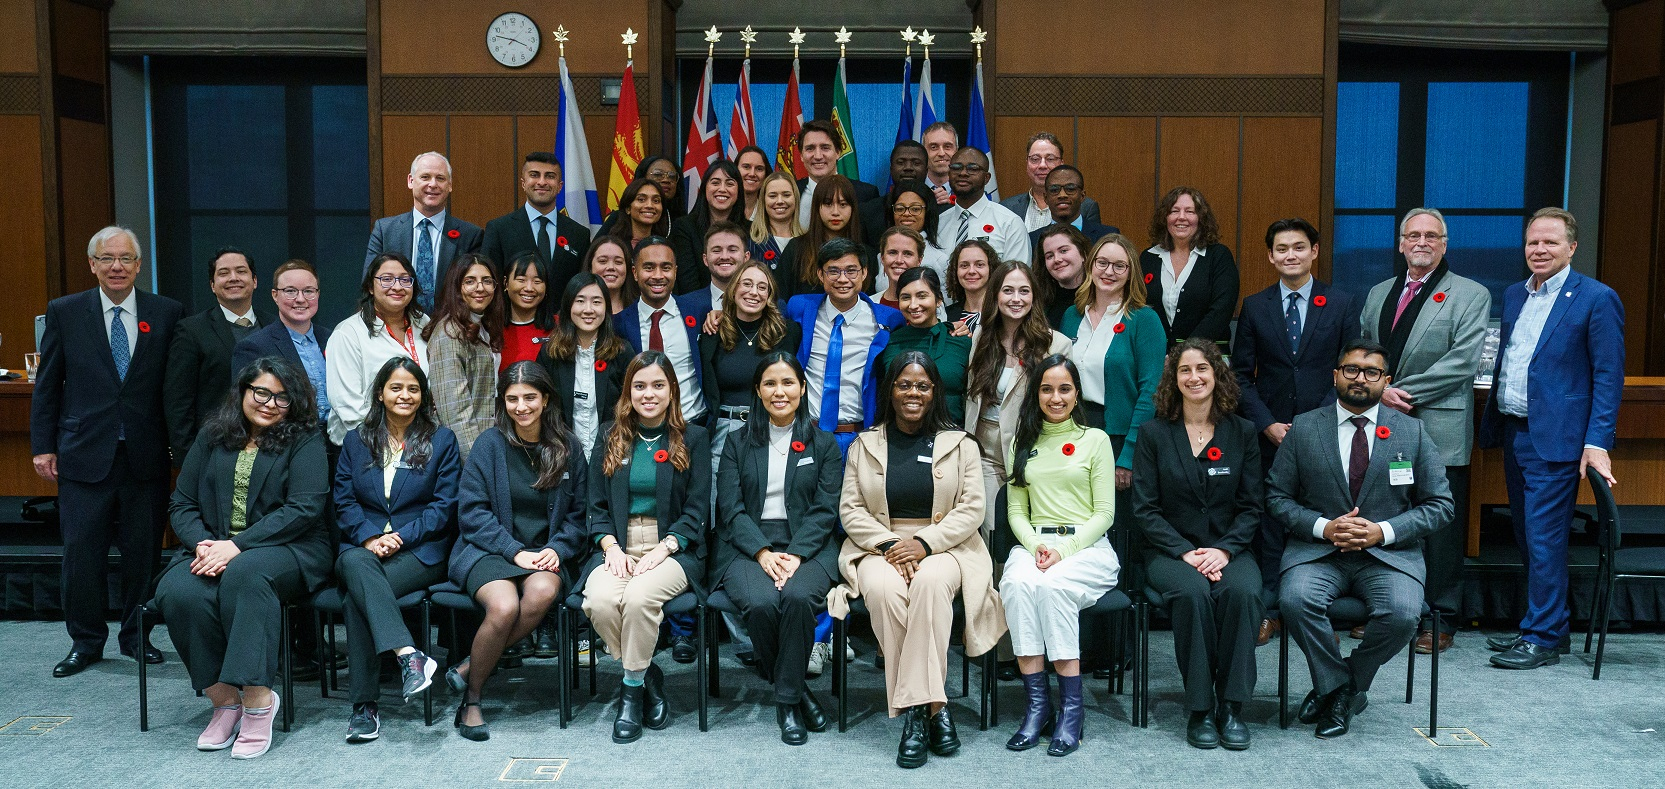 The McGill Master of Public Policy students positioned in a classroom-like setting while taking a group picture with Prime Minister Justin Trudeau.